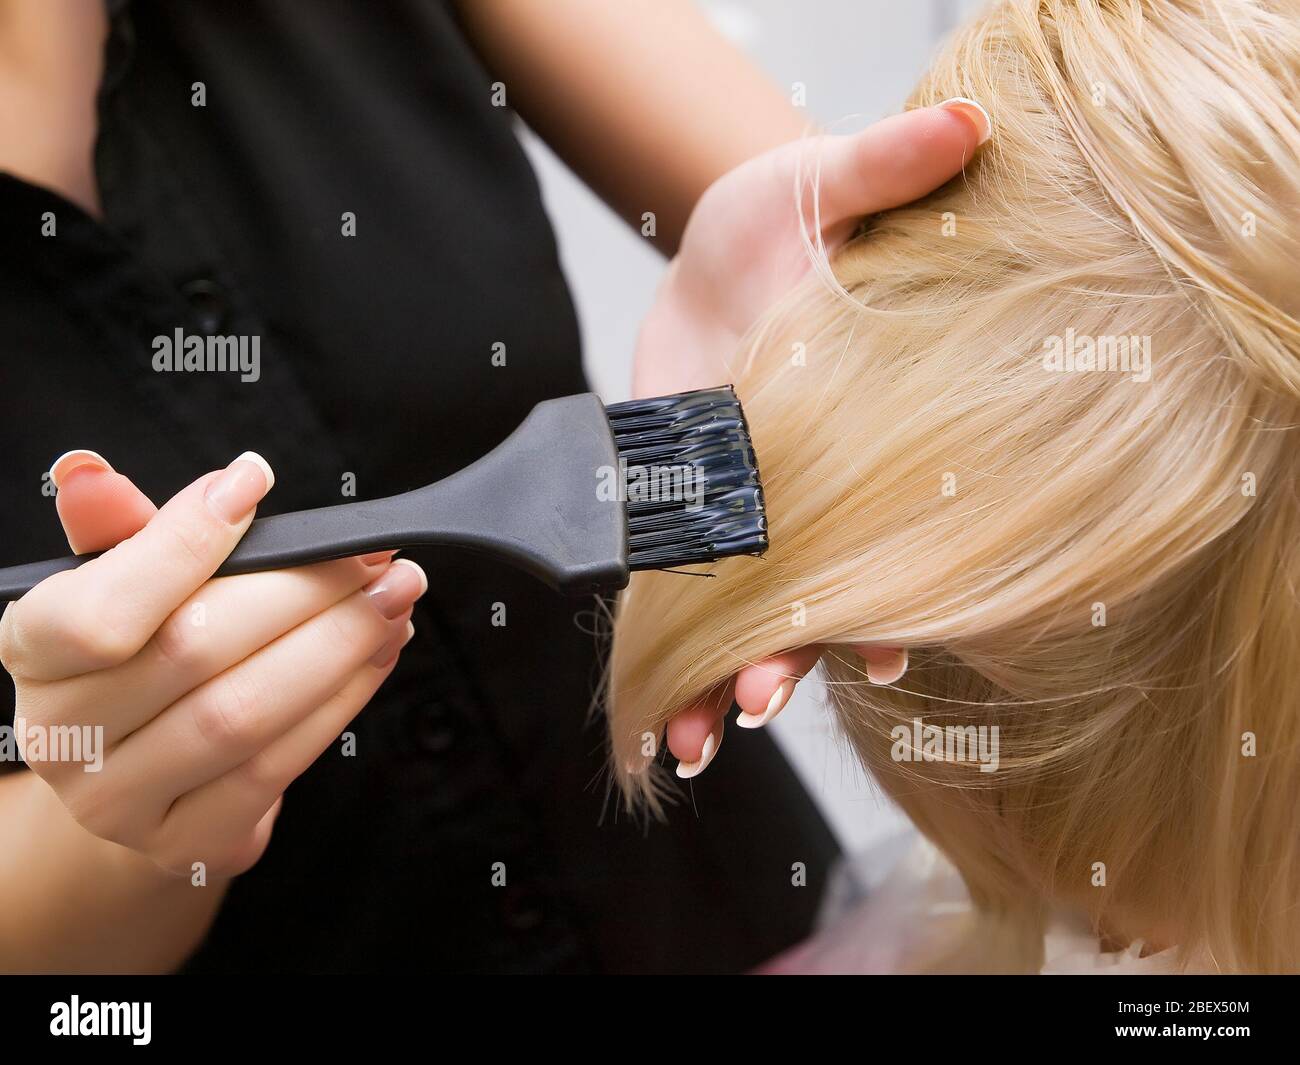 Hair coloring in a beauty salon in blonde. Hairdressing services. Stock Photo